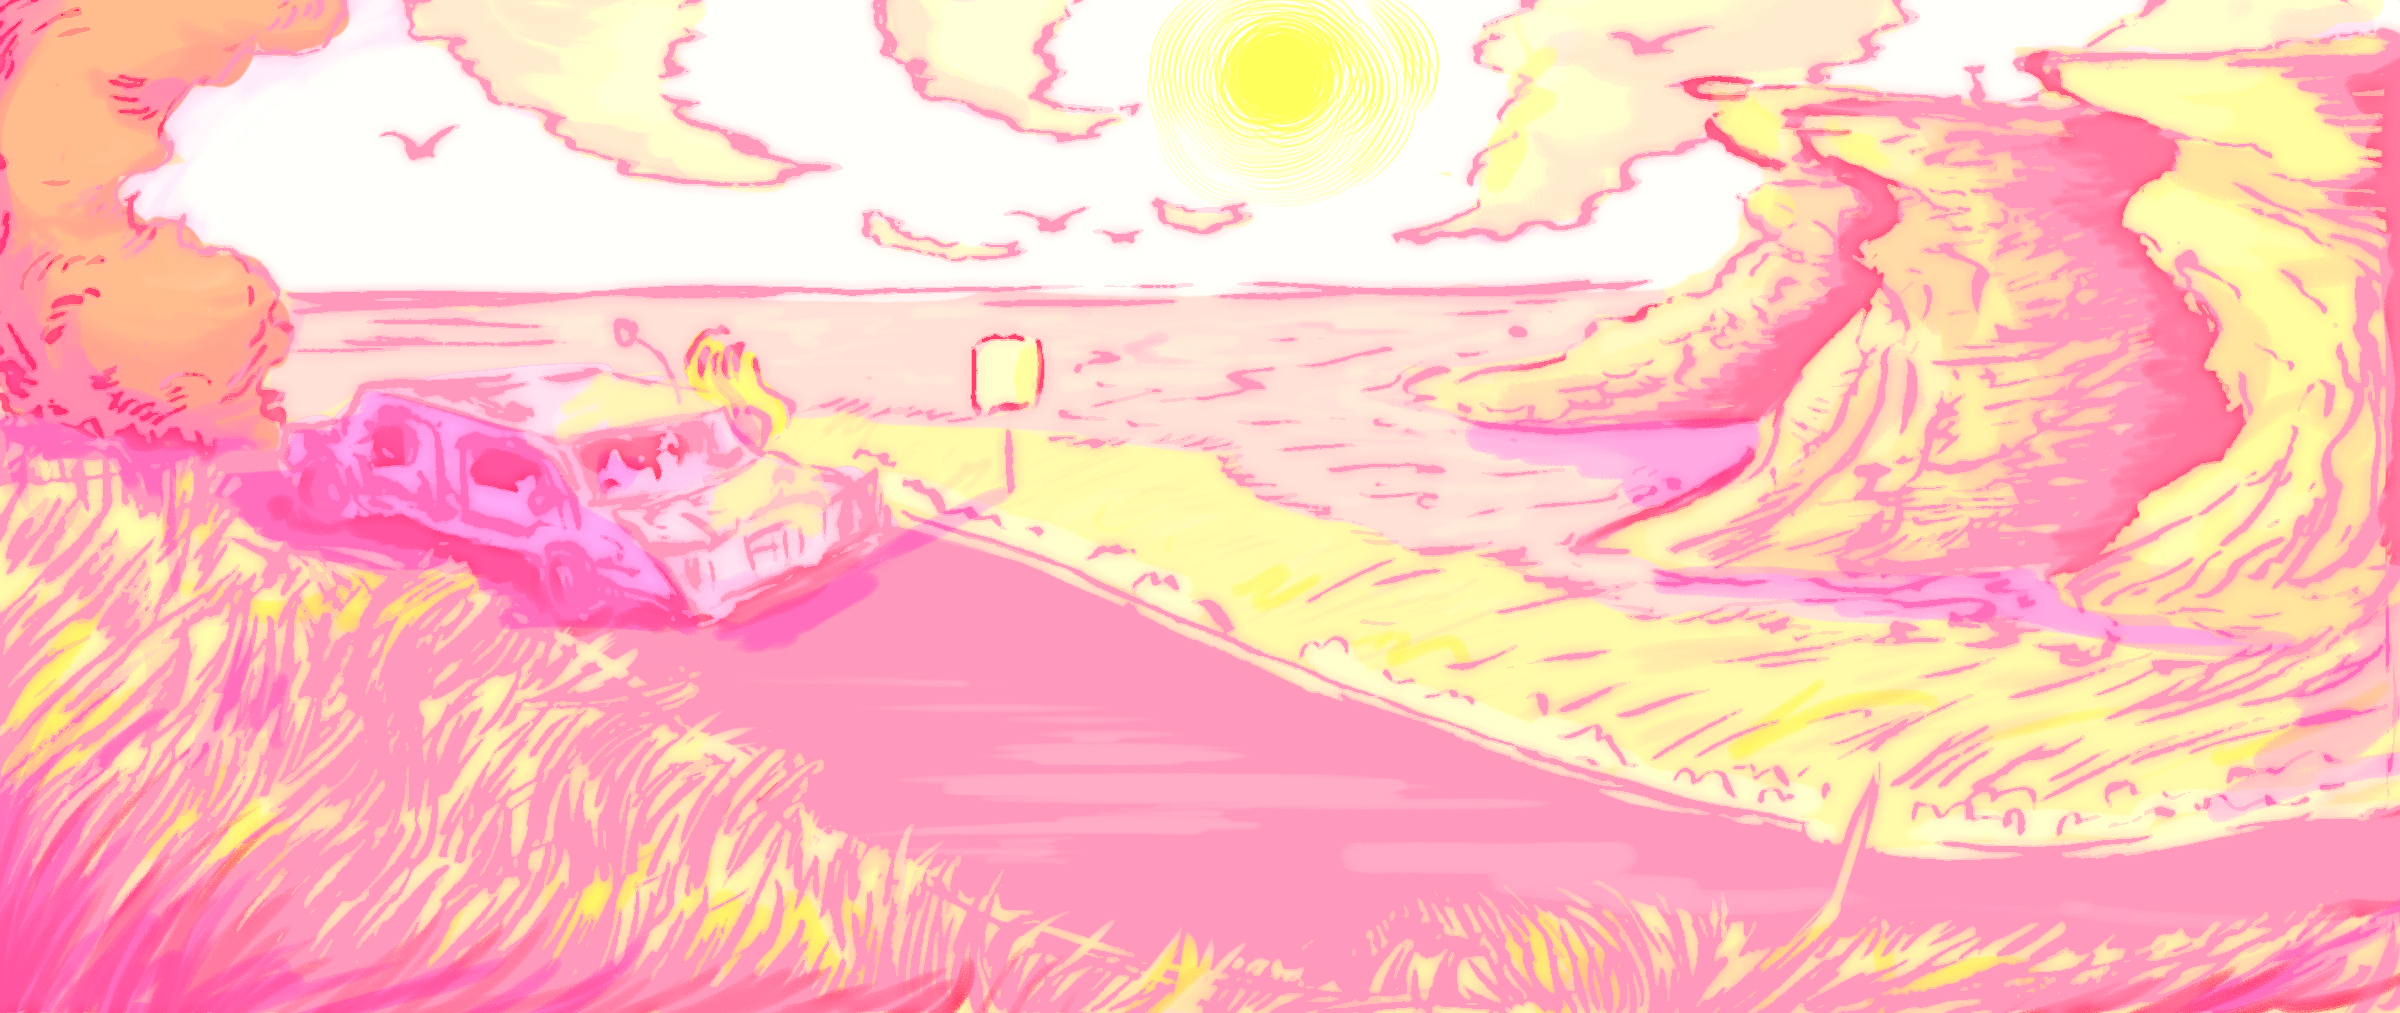 Illustration of a vintage pink car driving down an oceanside highway. Colors limited to yellow and pink.